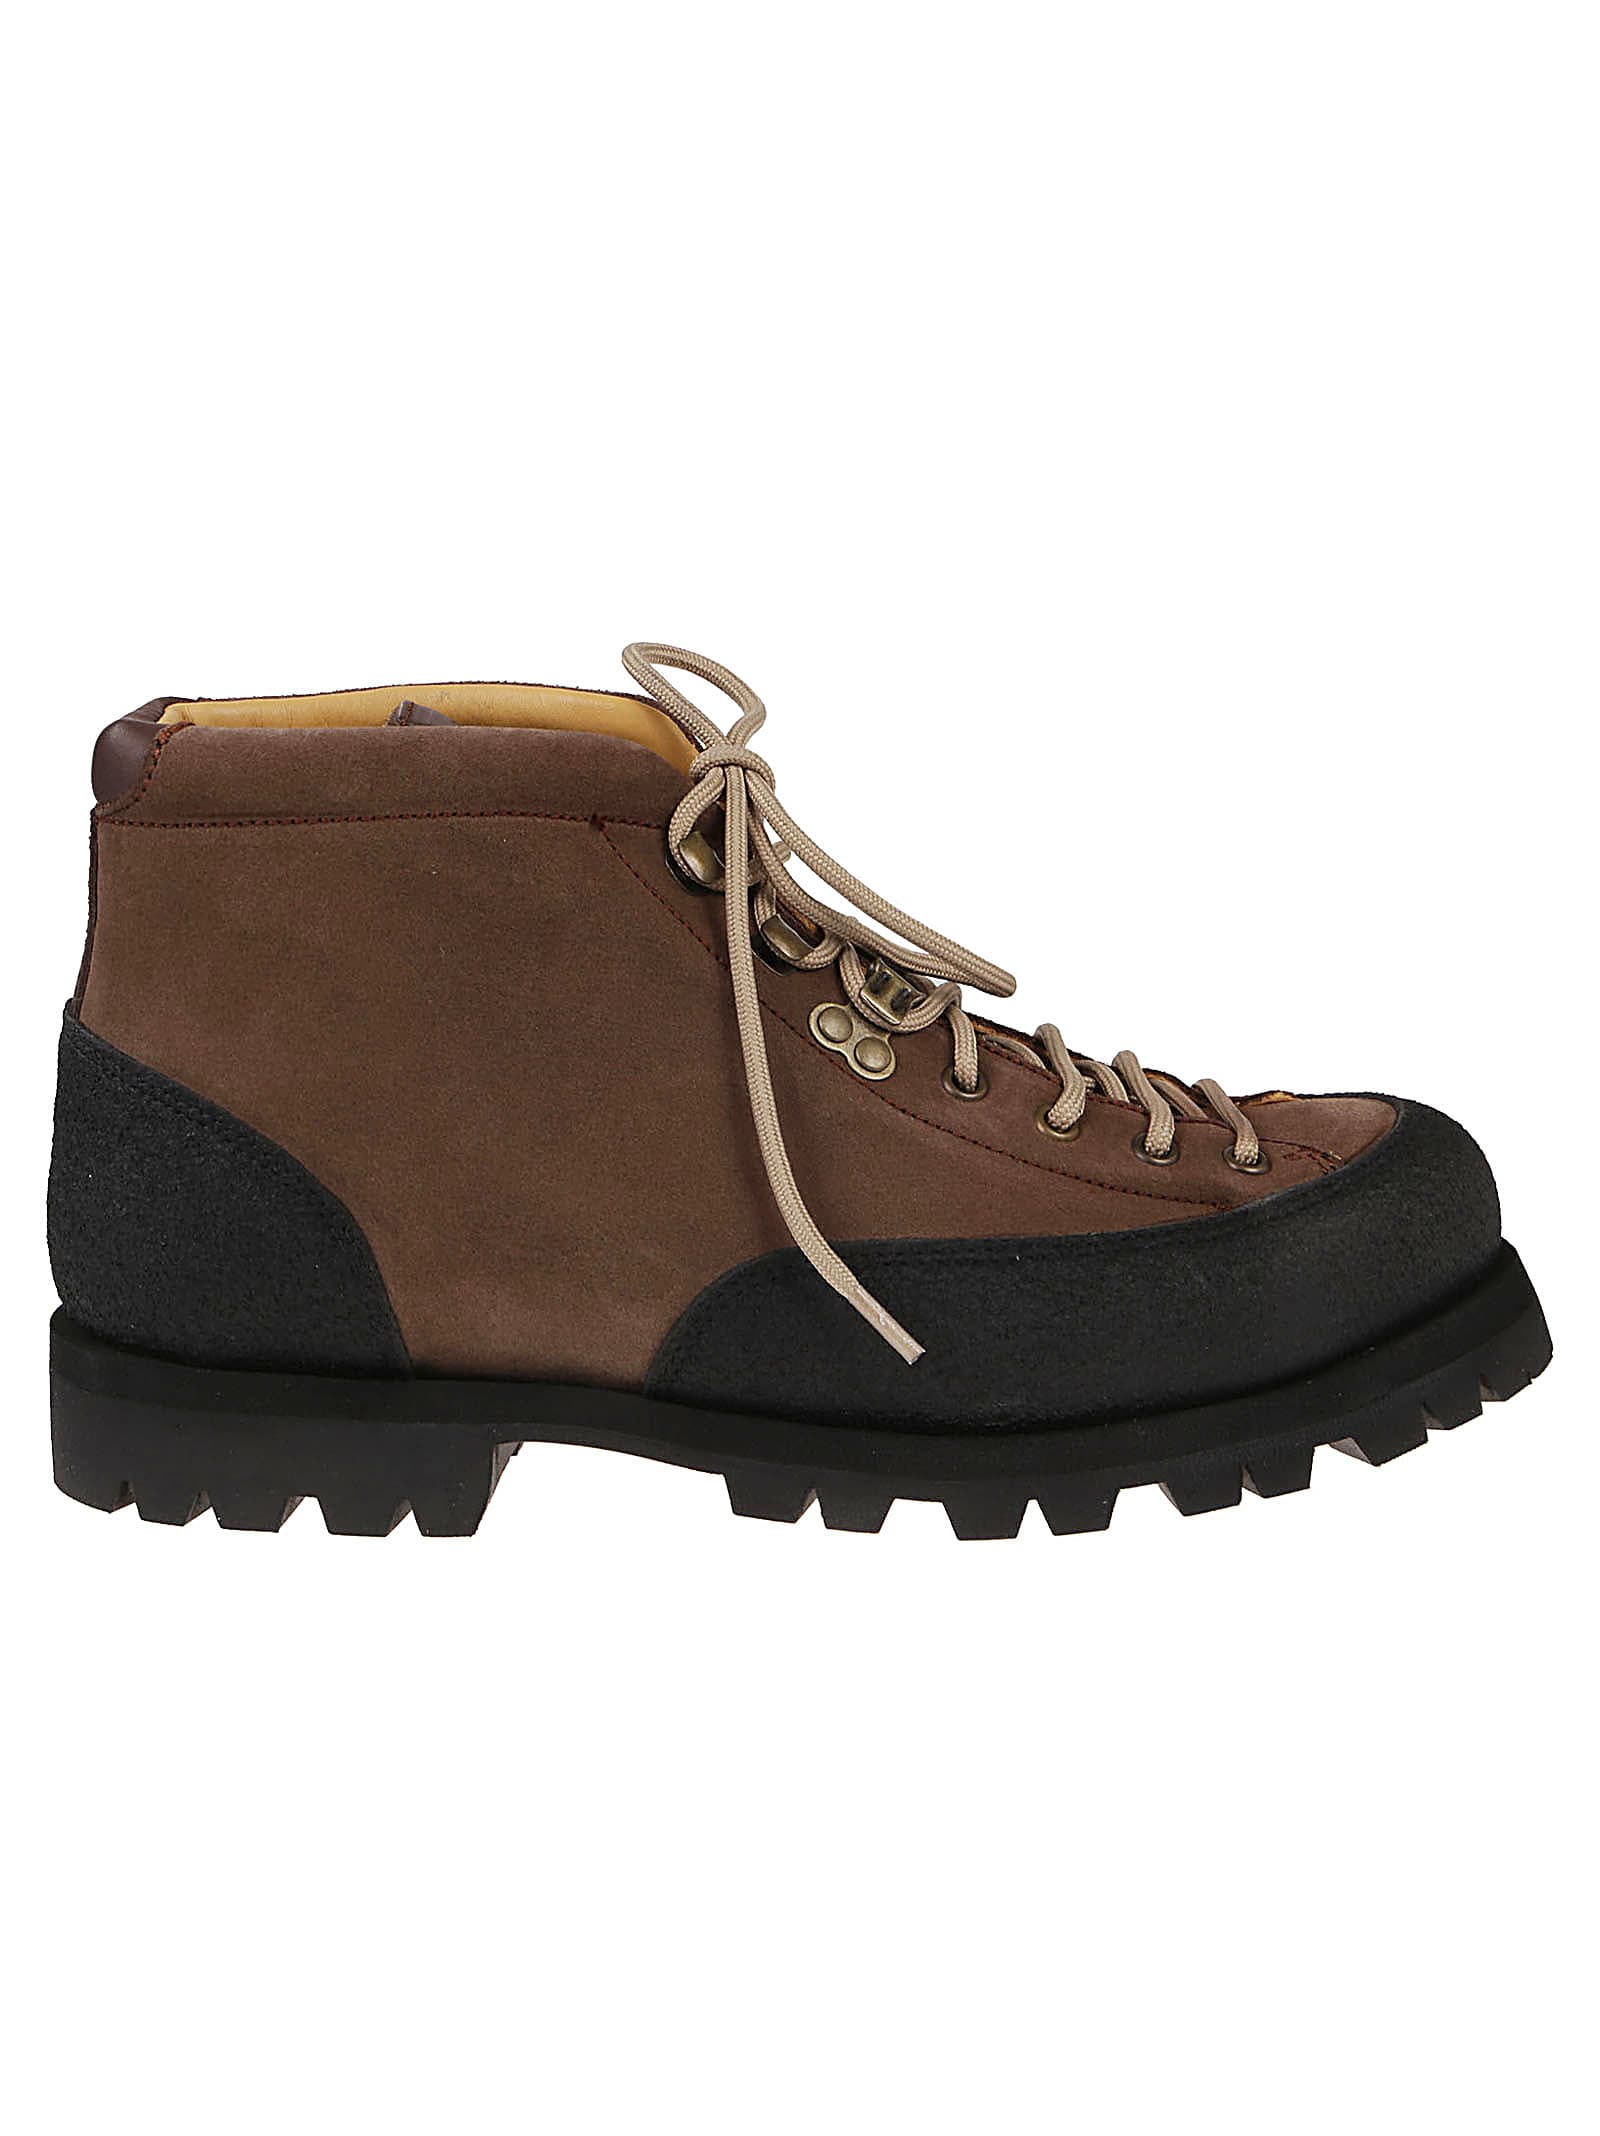 Paraboot Yosemite/jannu Ankle Boots